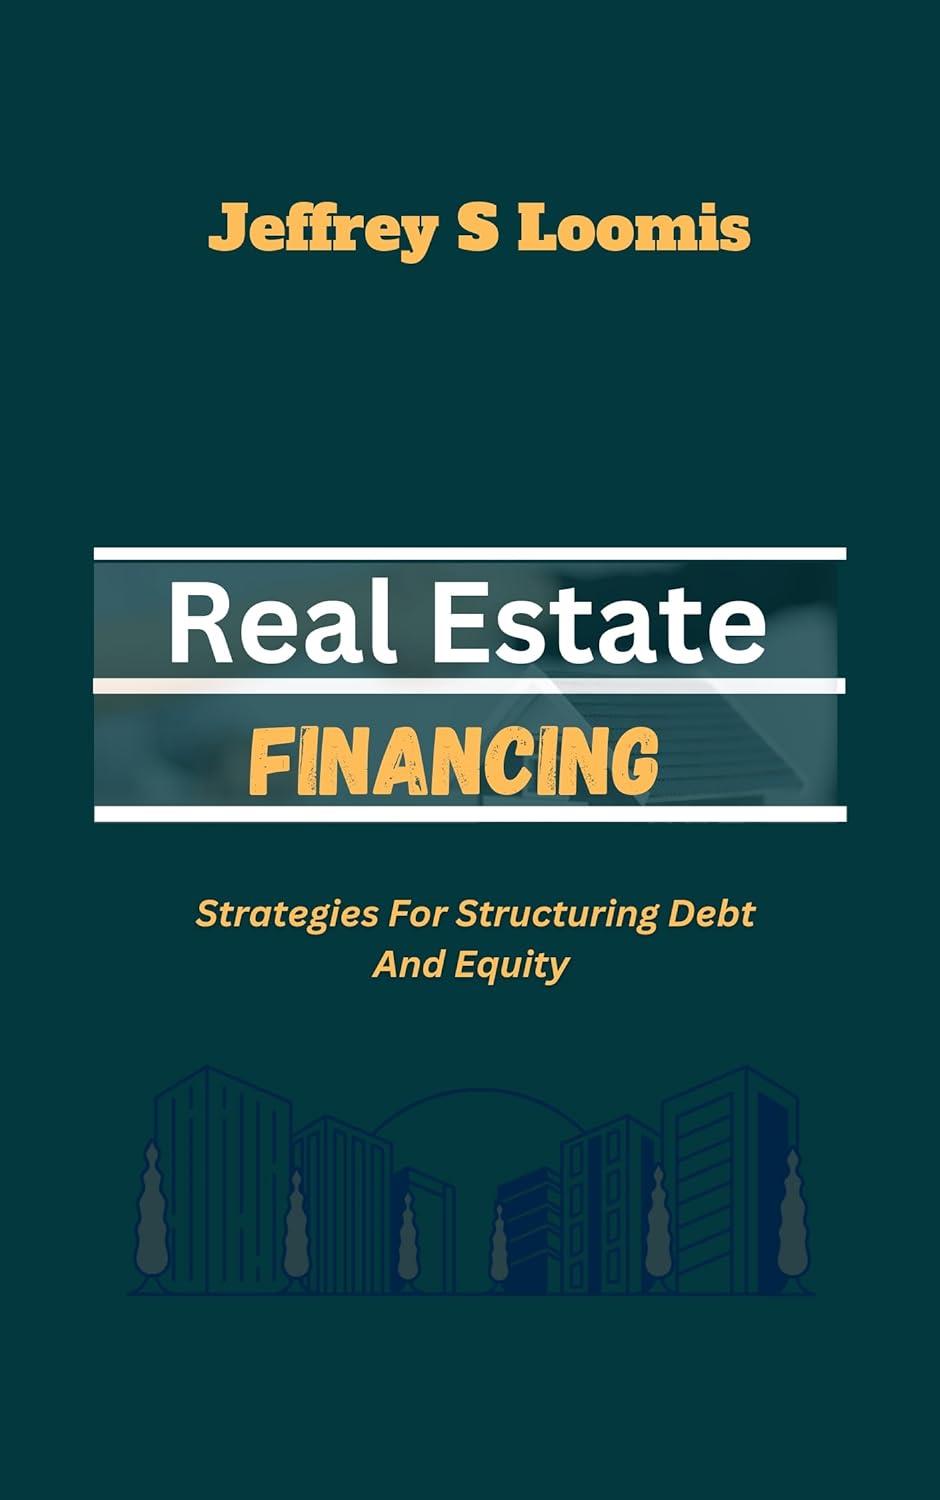 Real Estate Financing: Strategies for Structuring Debt and Equity